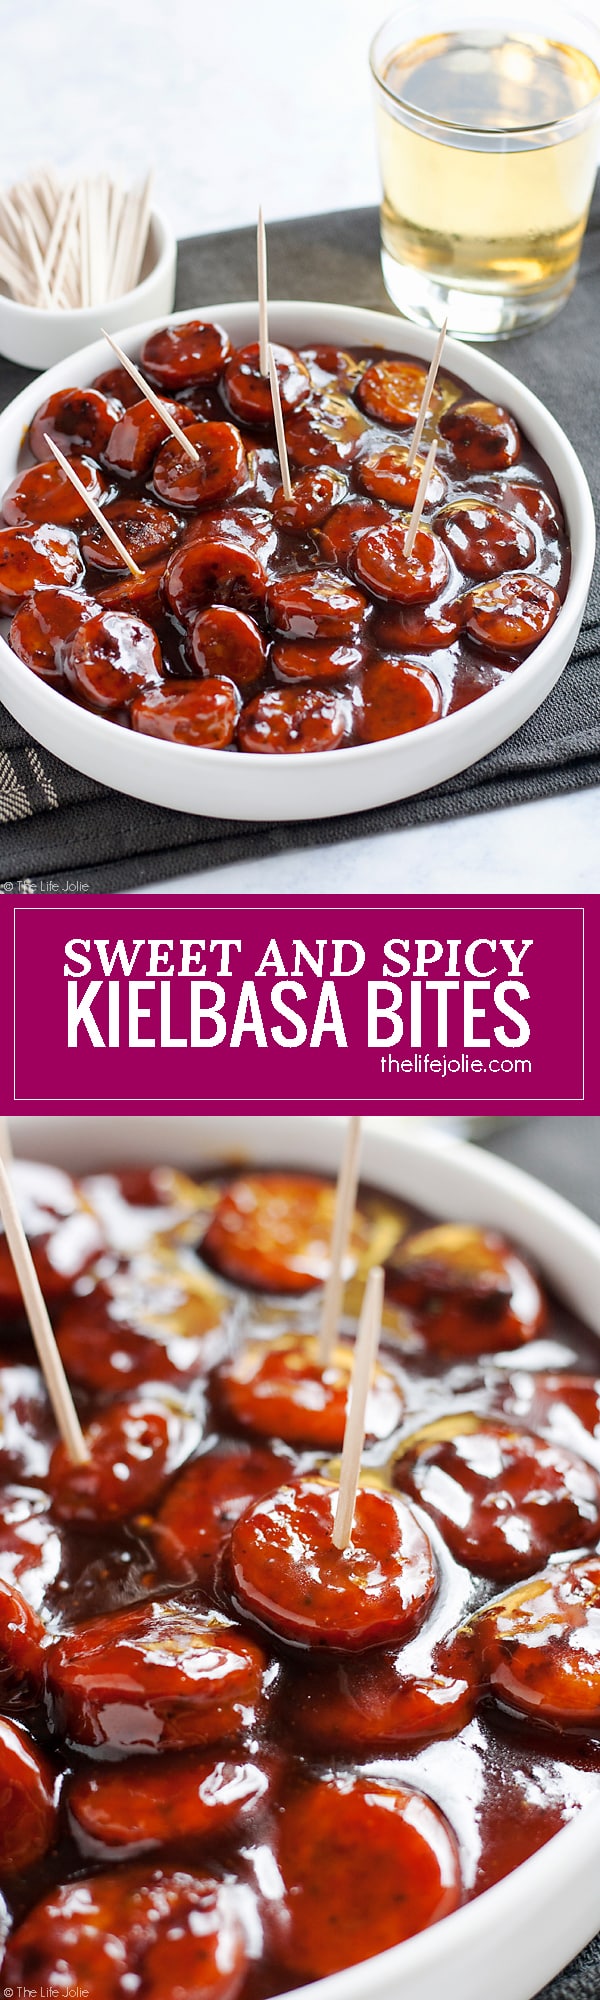 These Sweet and Spicy Kielbasa Bites are such an easy recipe! Just 3 simple ingredients and they're ready in around 20 minutes. These glazed sausage bites are sure to be at hit at any holiday or game day party!